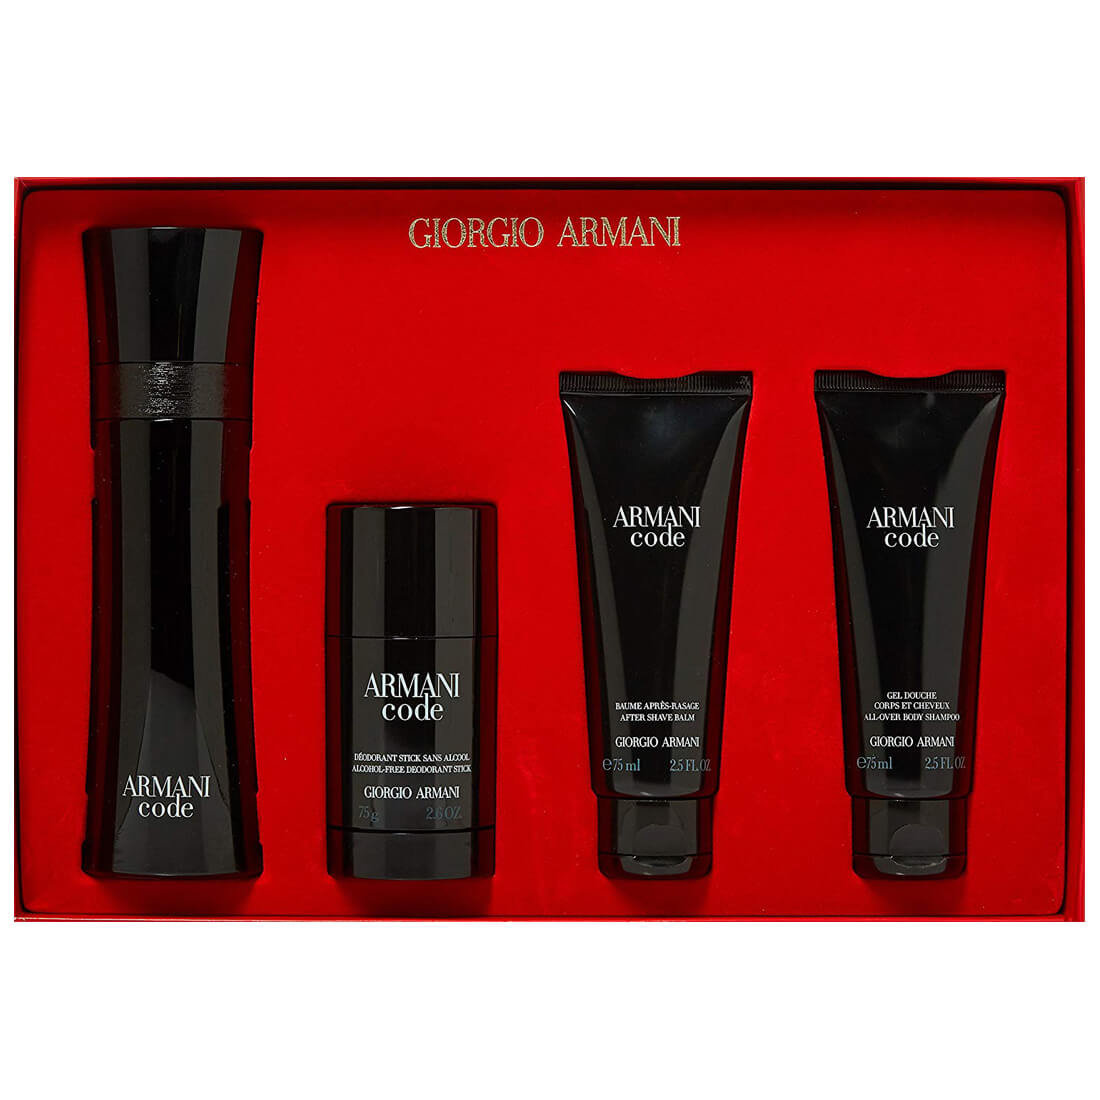 armani aftershave gift sets